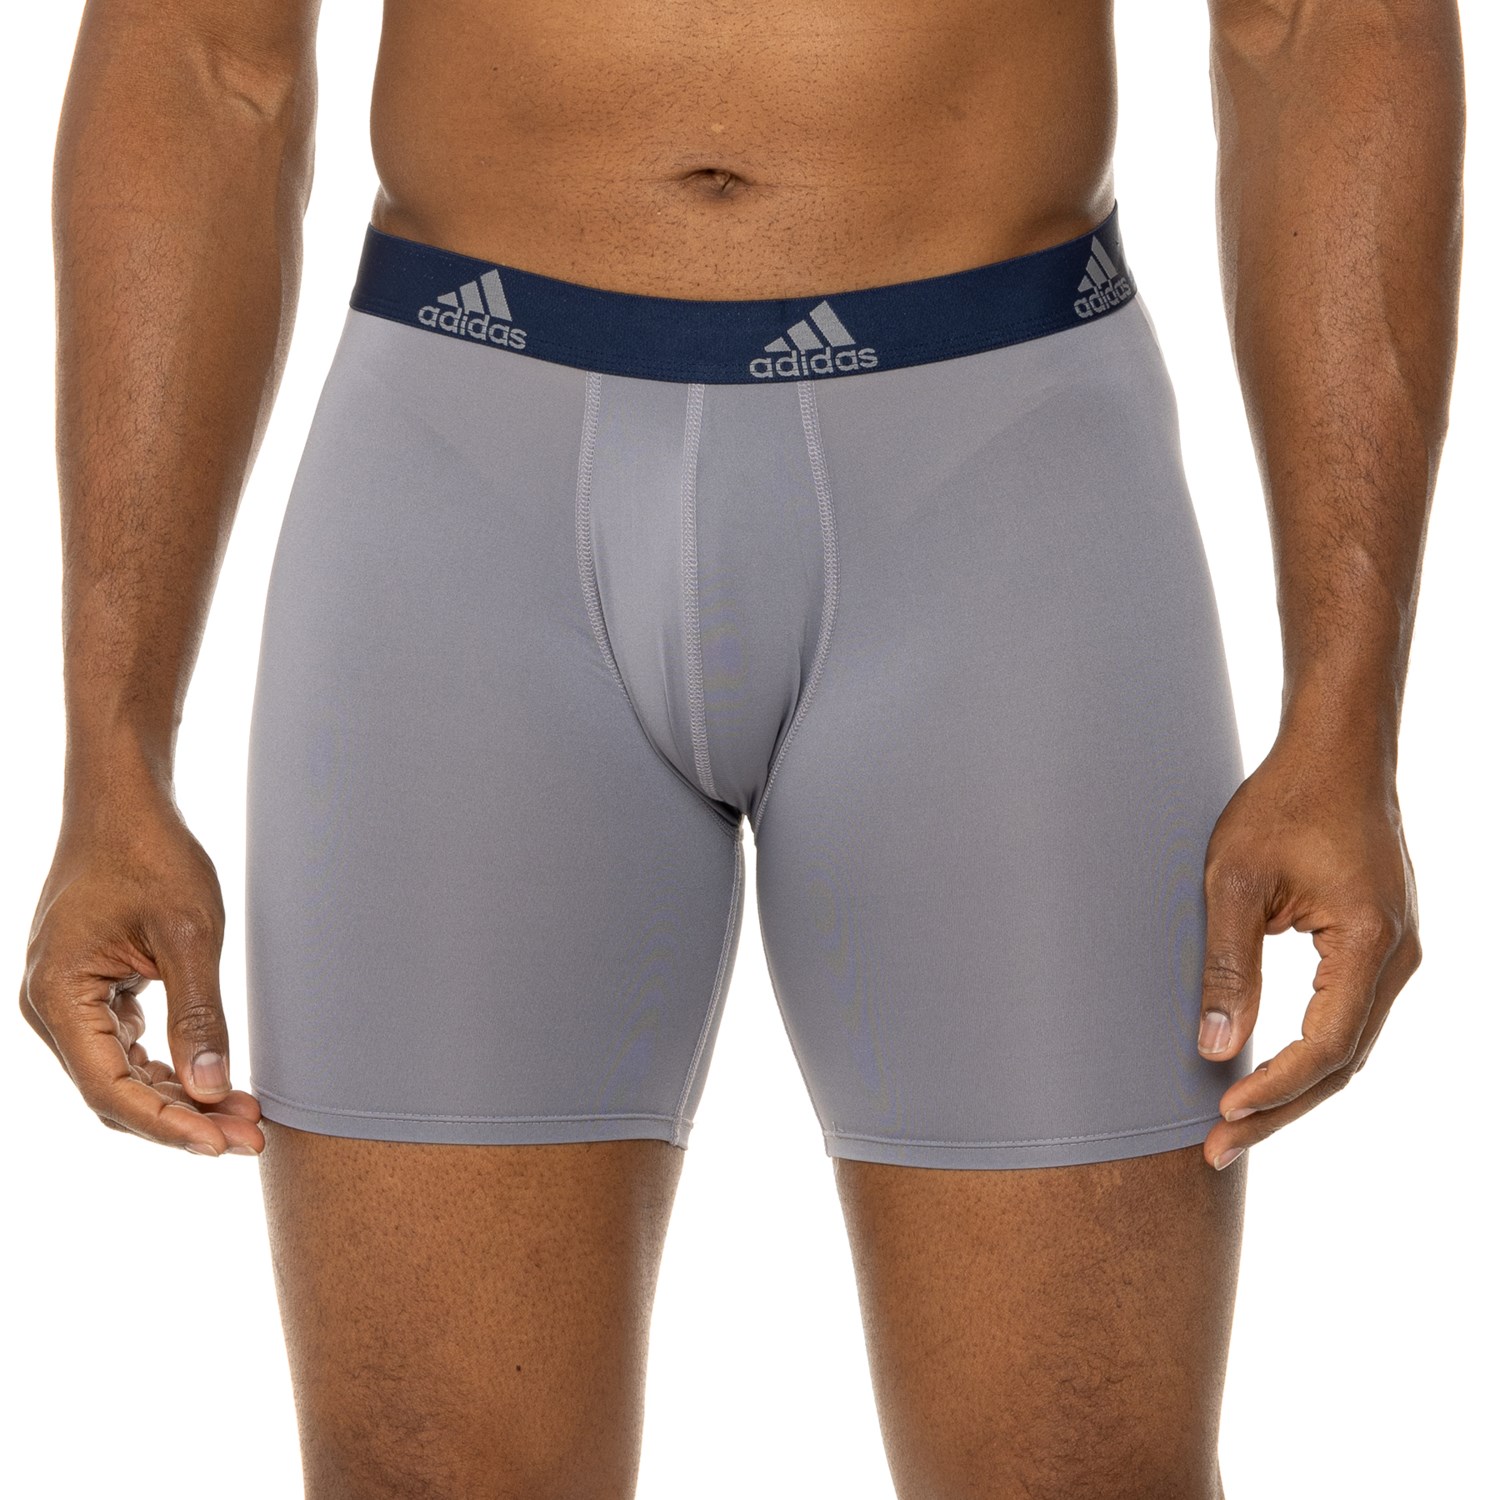 adidas Core Sport-Performance Boxer Briefs - 3-Pack - Save 46%